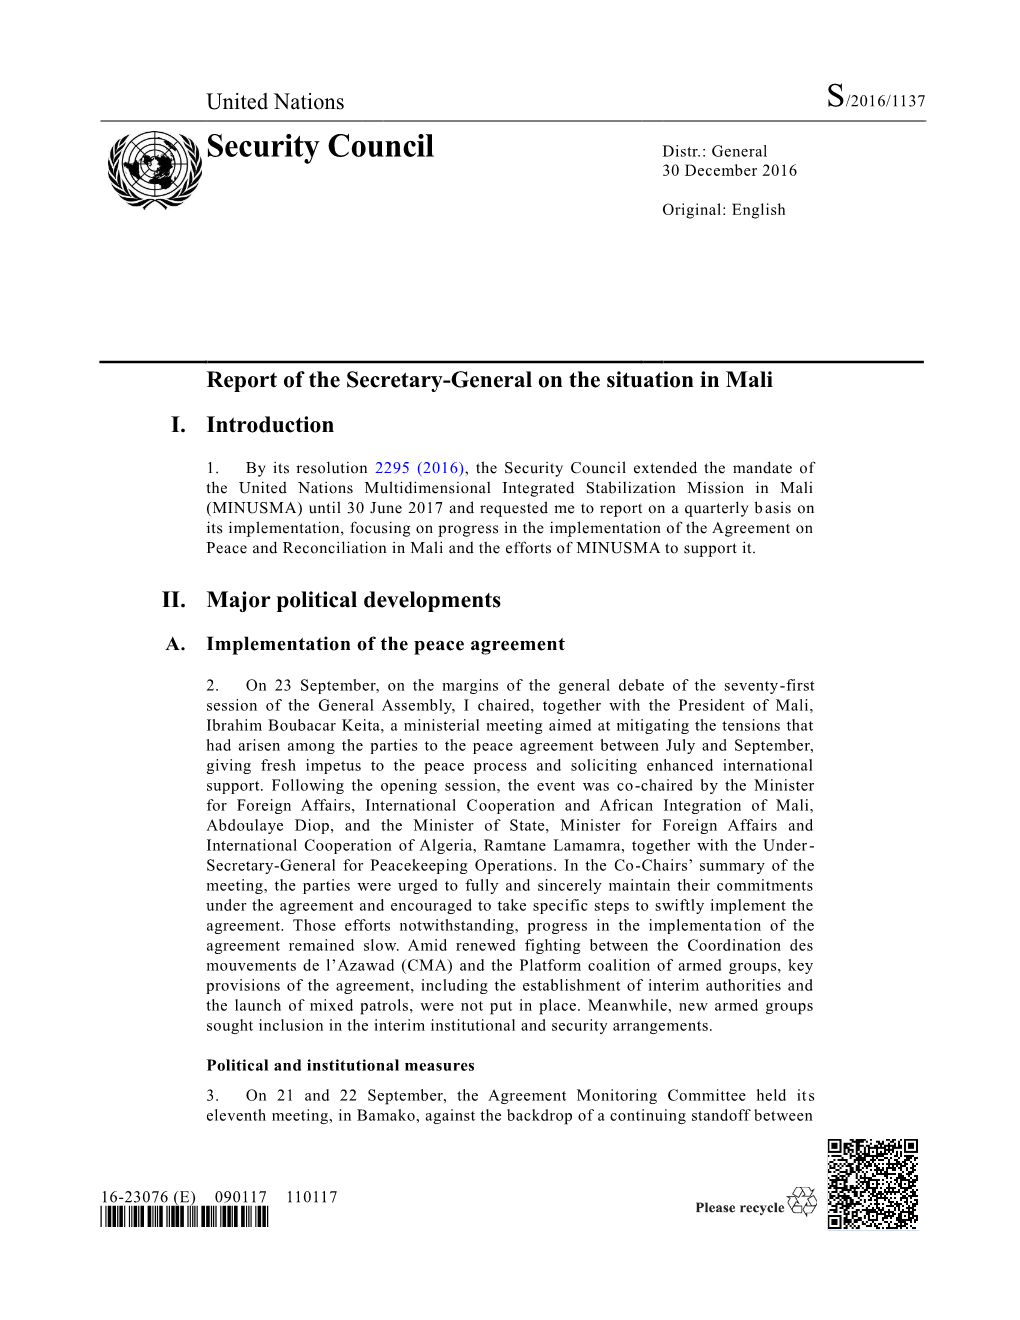 Report of the Secretary-General on the Situation in Mali